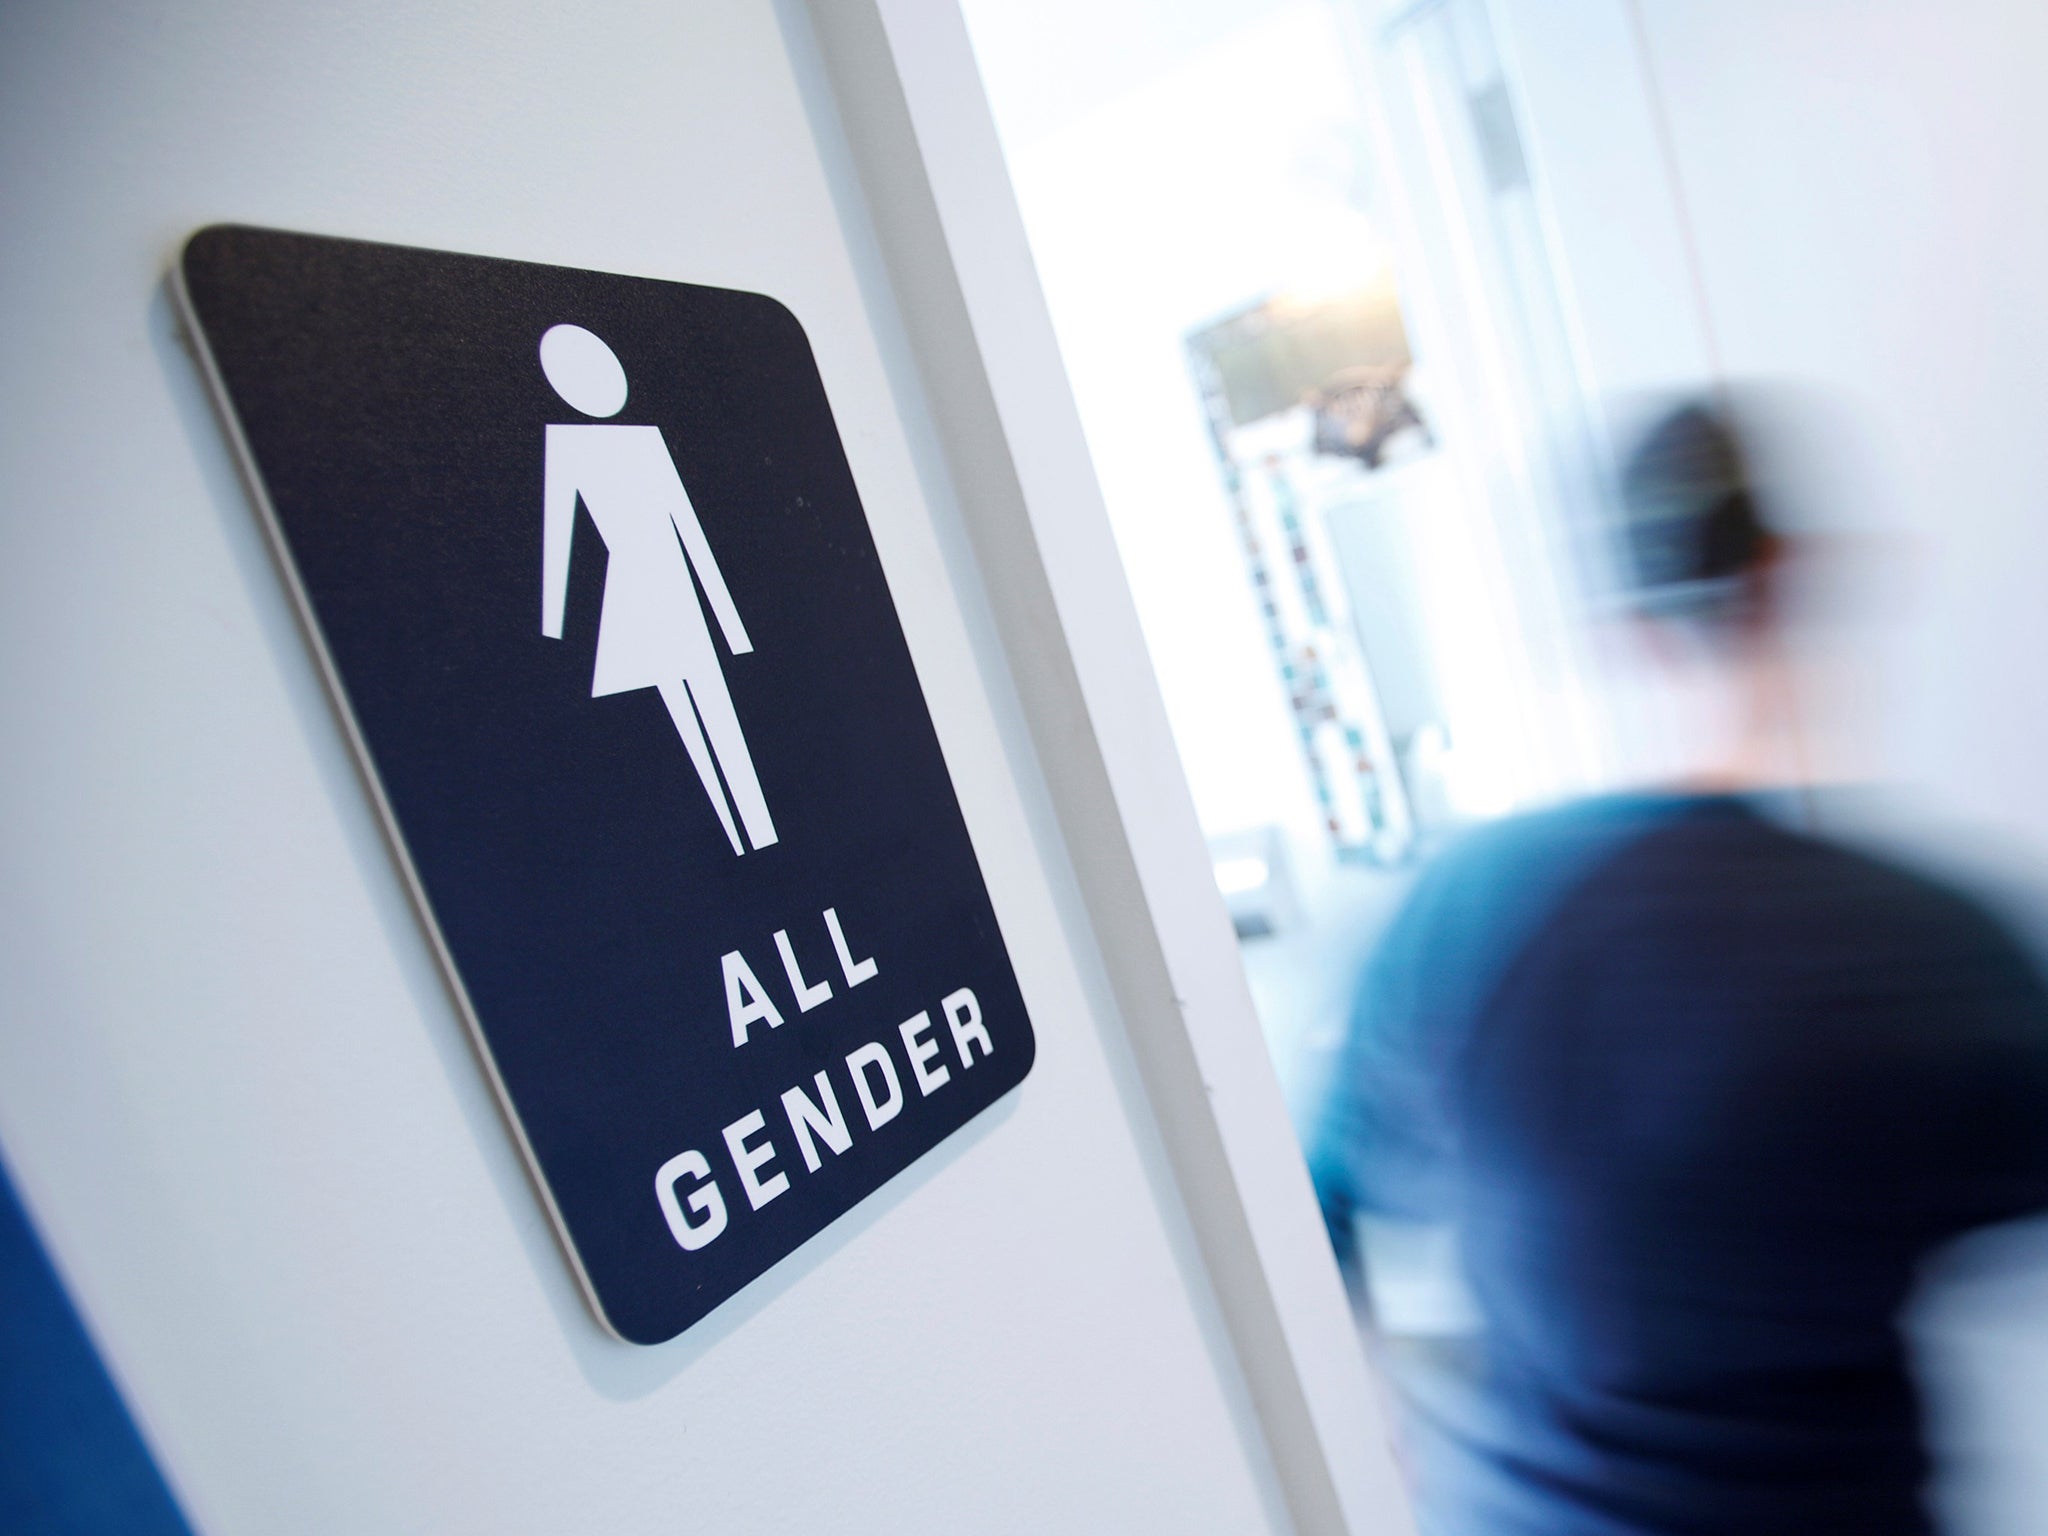 The Justice Department says the bathroom law violates the civil rights of transgender people